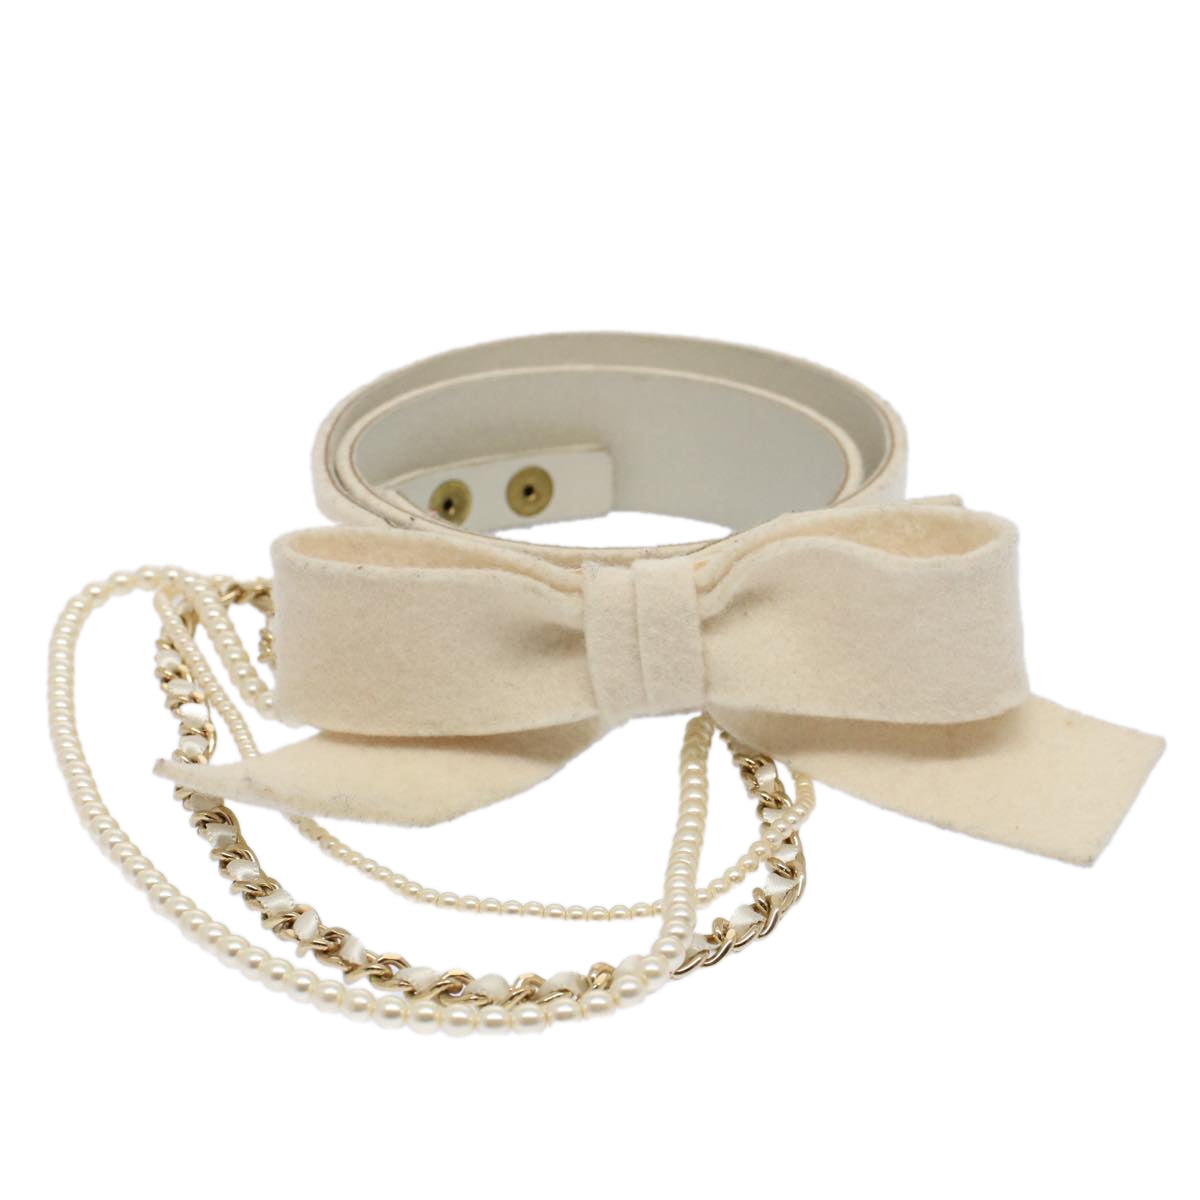 CHANEL Pearl Belt Wool 80/32 37.4"" White CC Auth bs9177 - 0